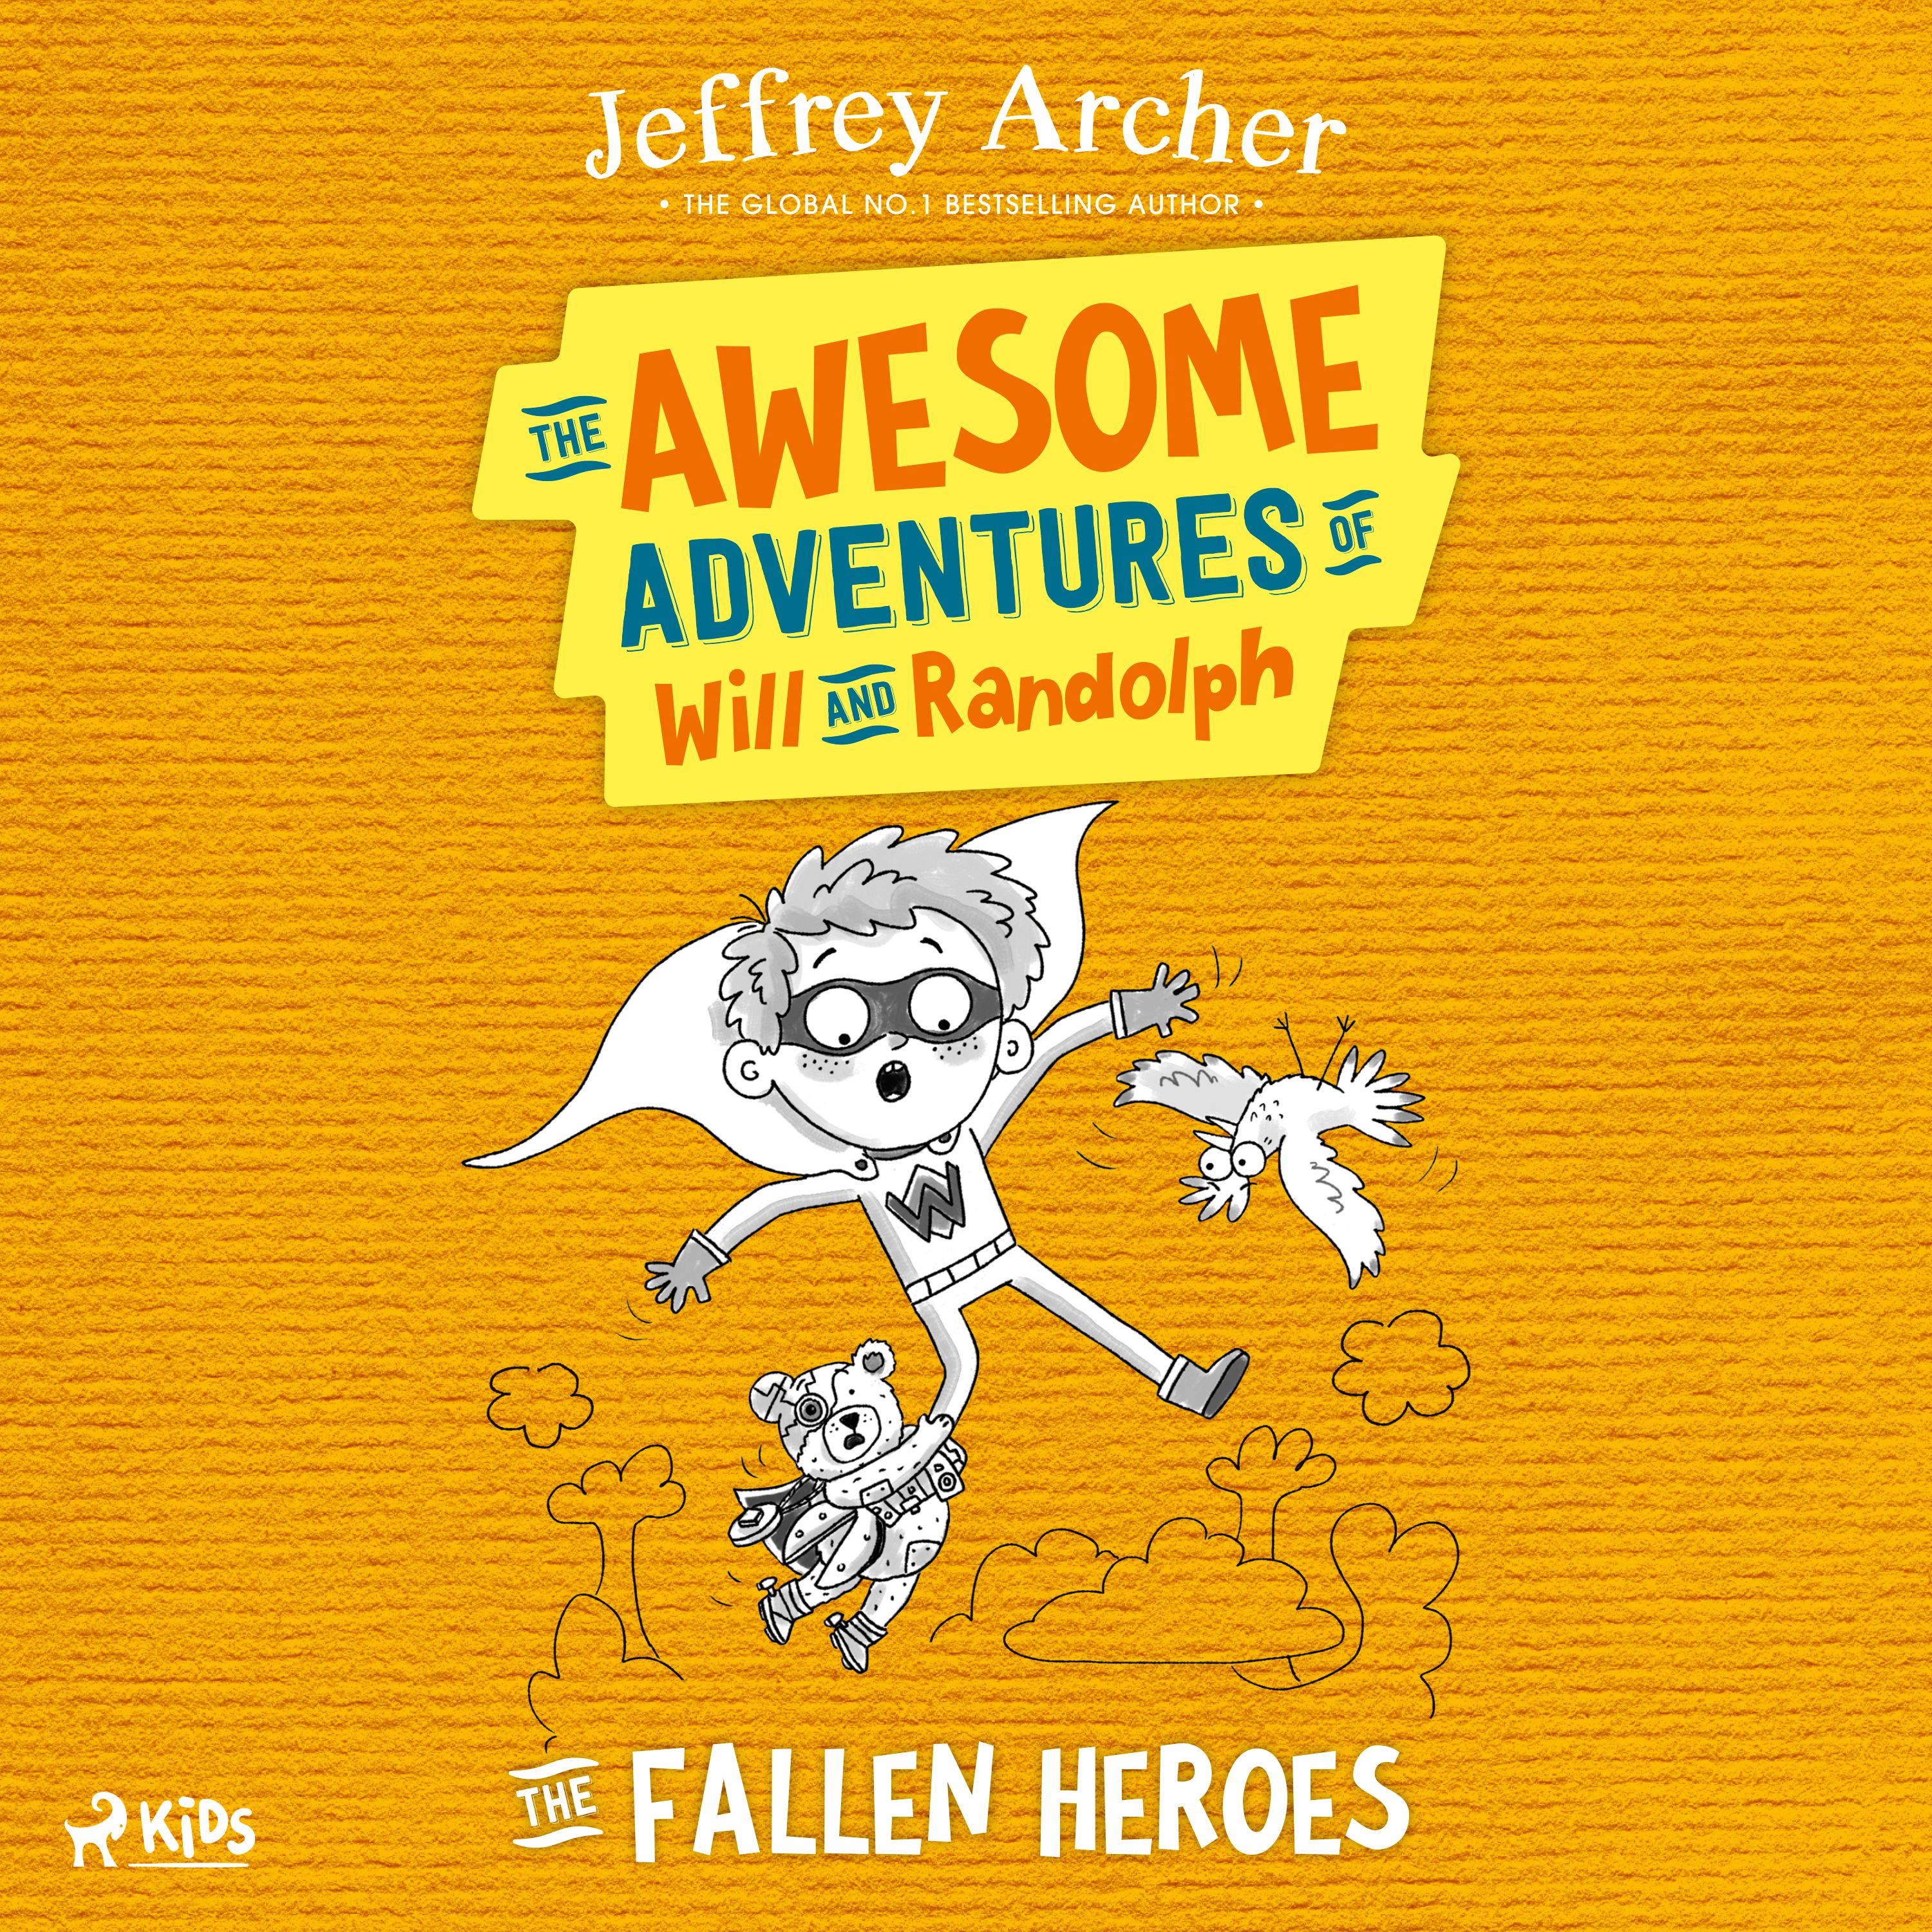 The Awesome Adventures of Will and Randolph: The Fallen Heroes, ljudbok av Jeffrey Archer